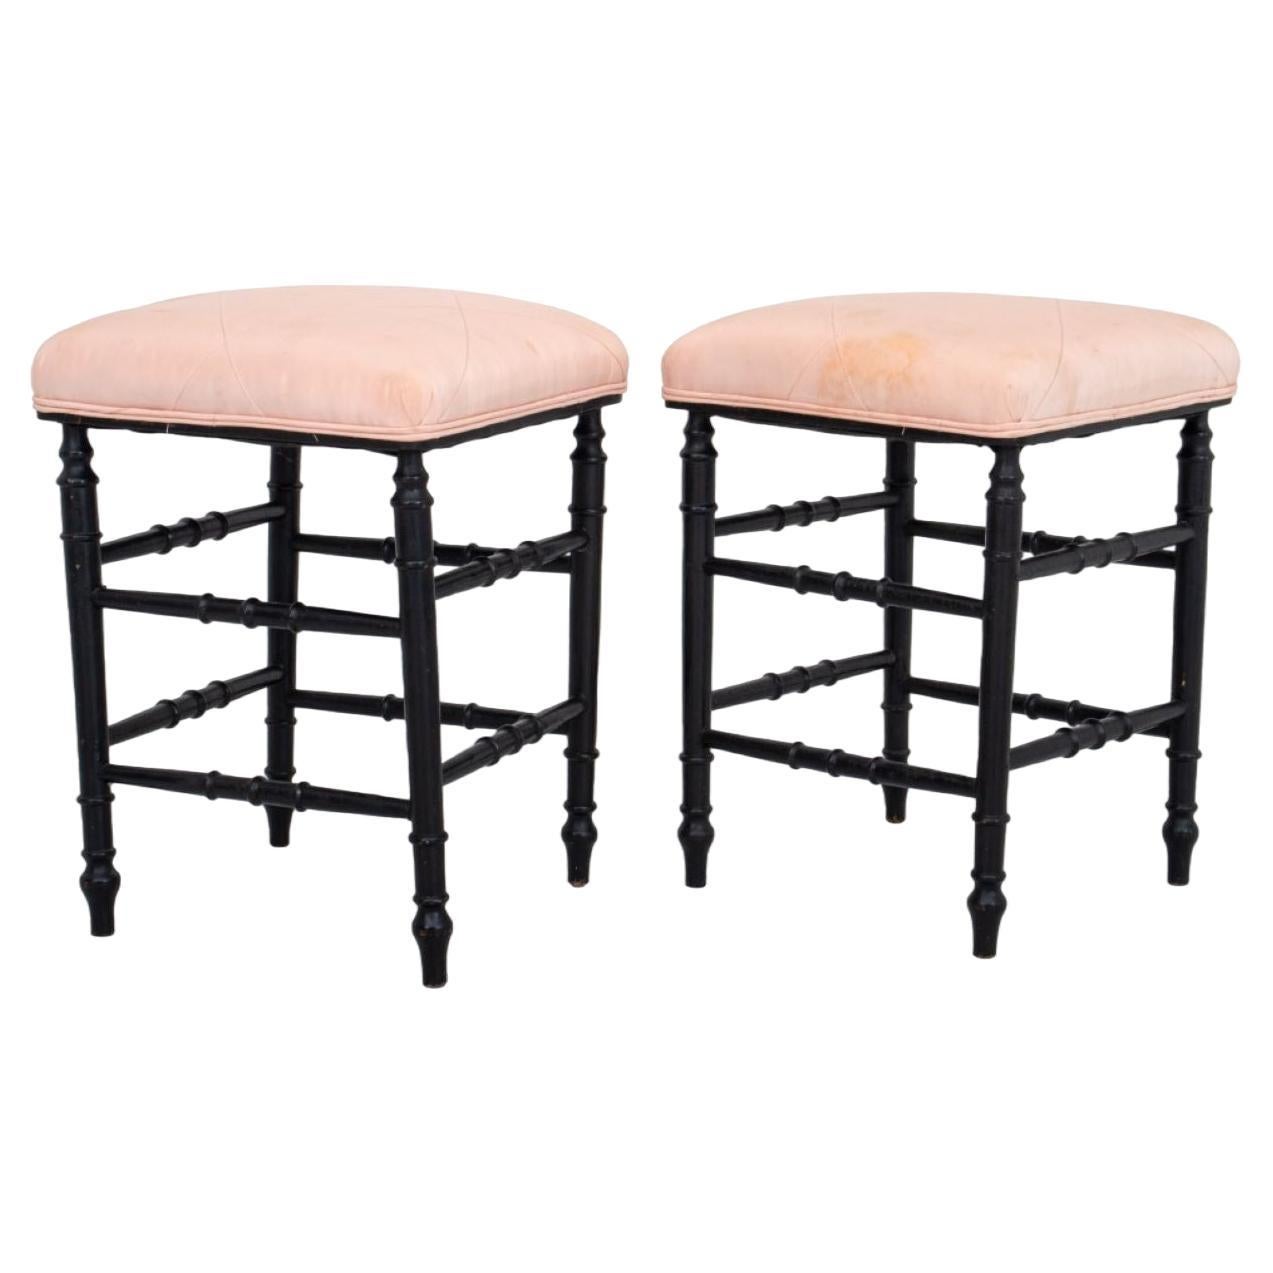 Pair of Pink Suede Foot Stools, 2 For Sale